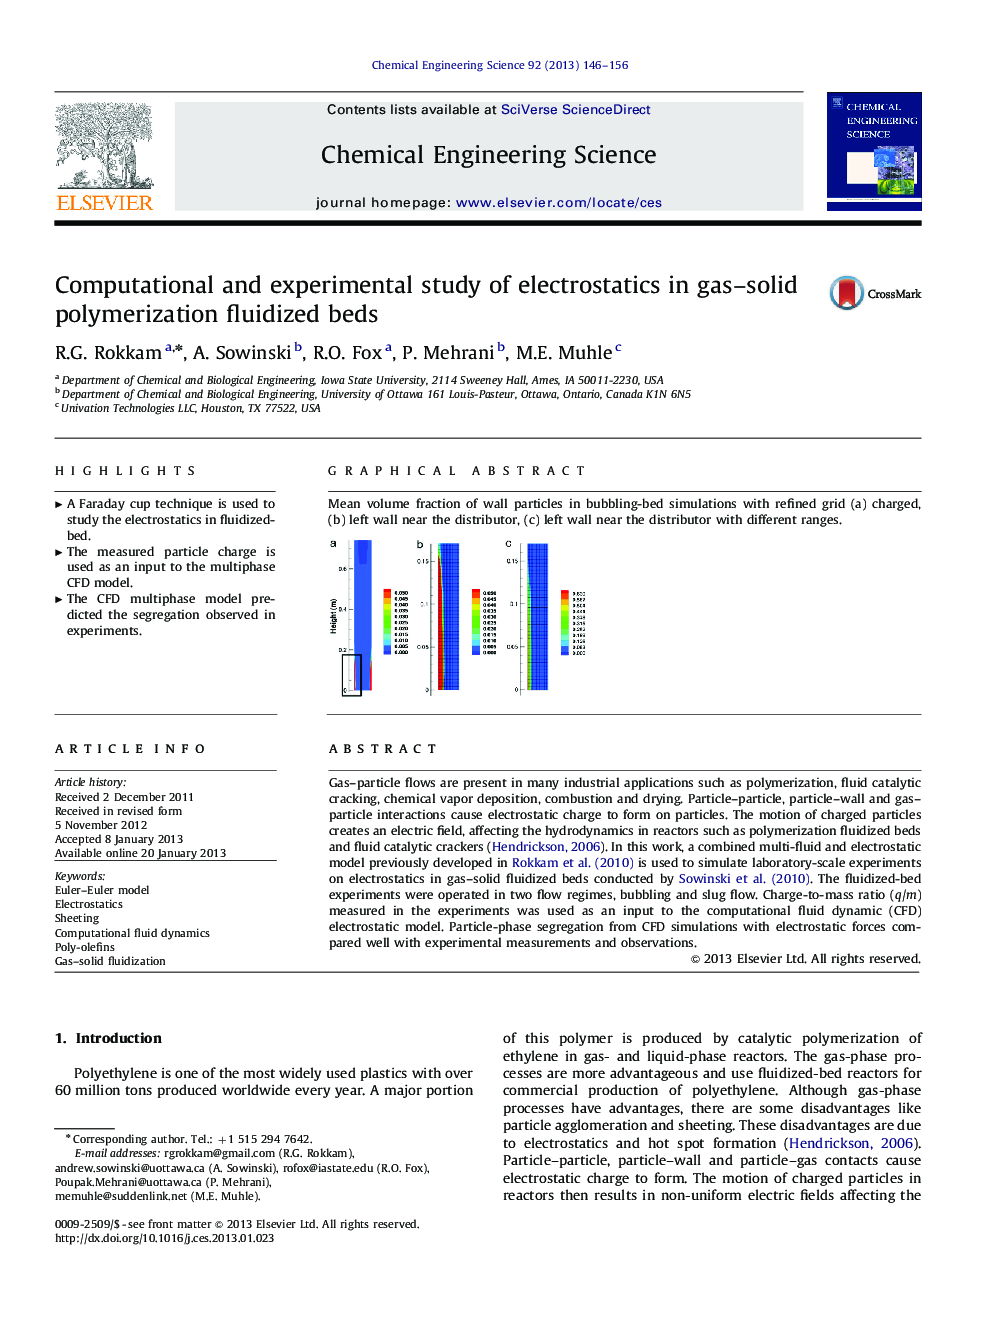 Computational and experimental study of electrostatics in gas–solid polymerization fluidized beds